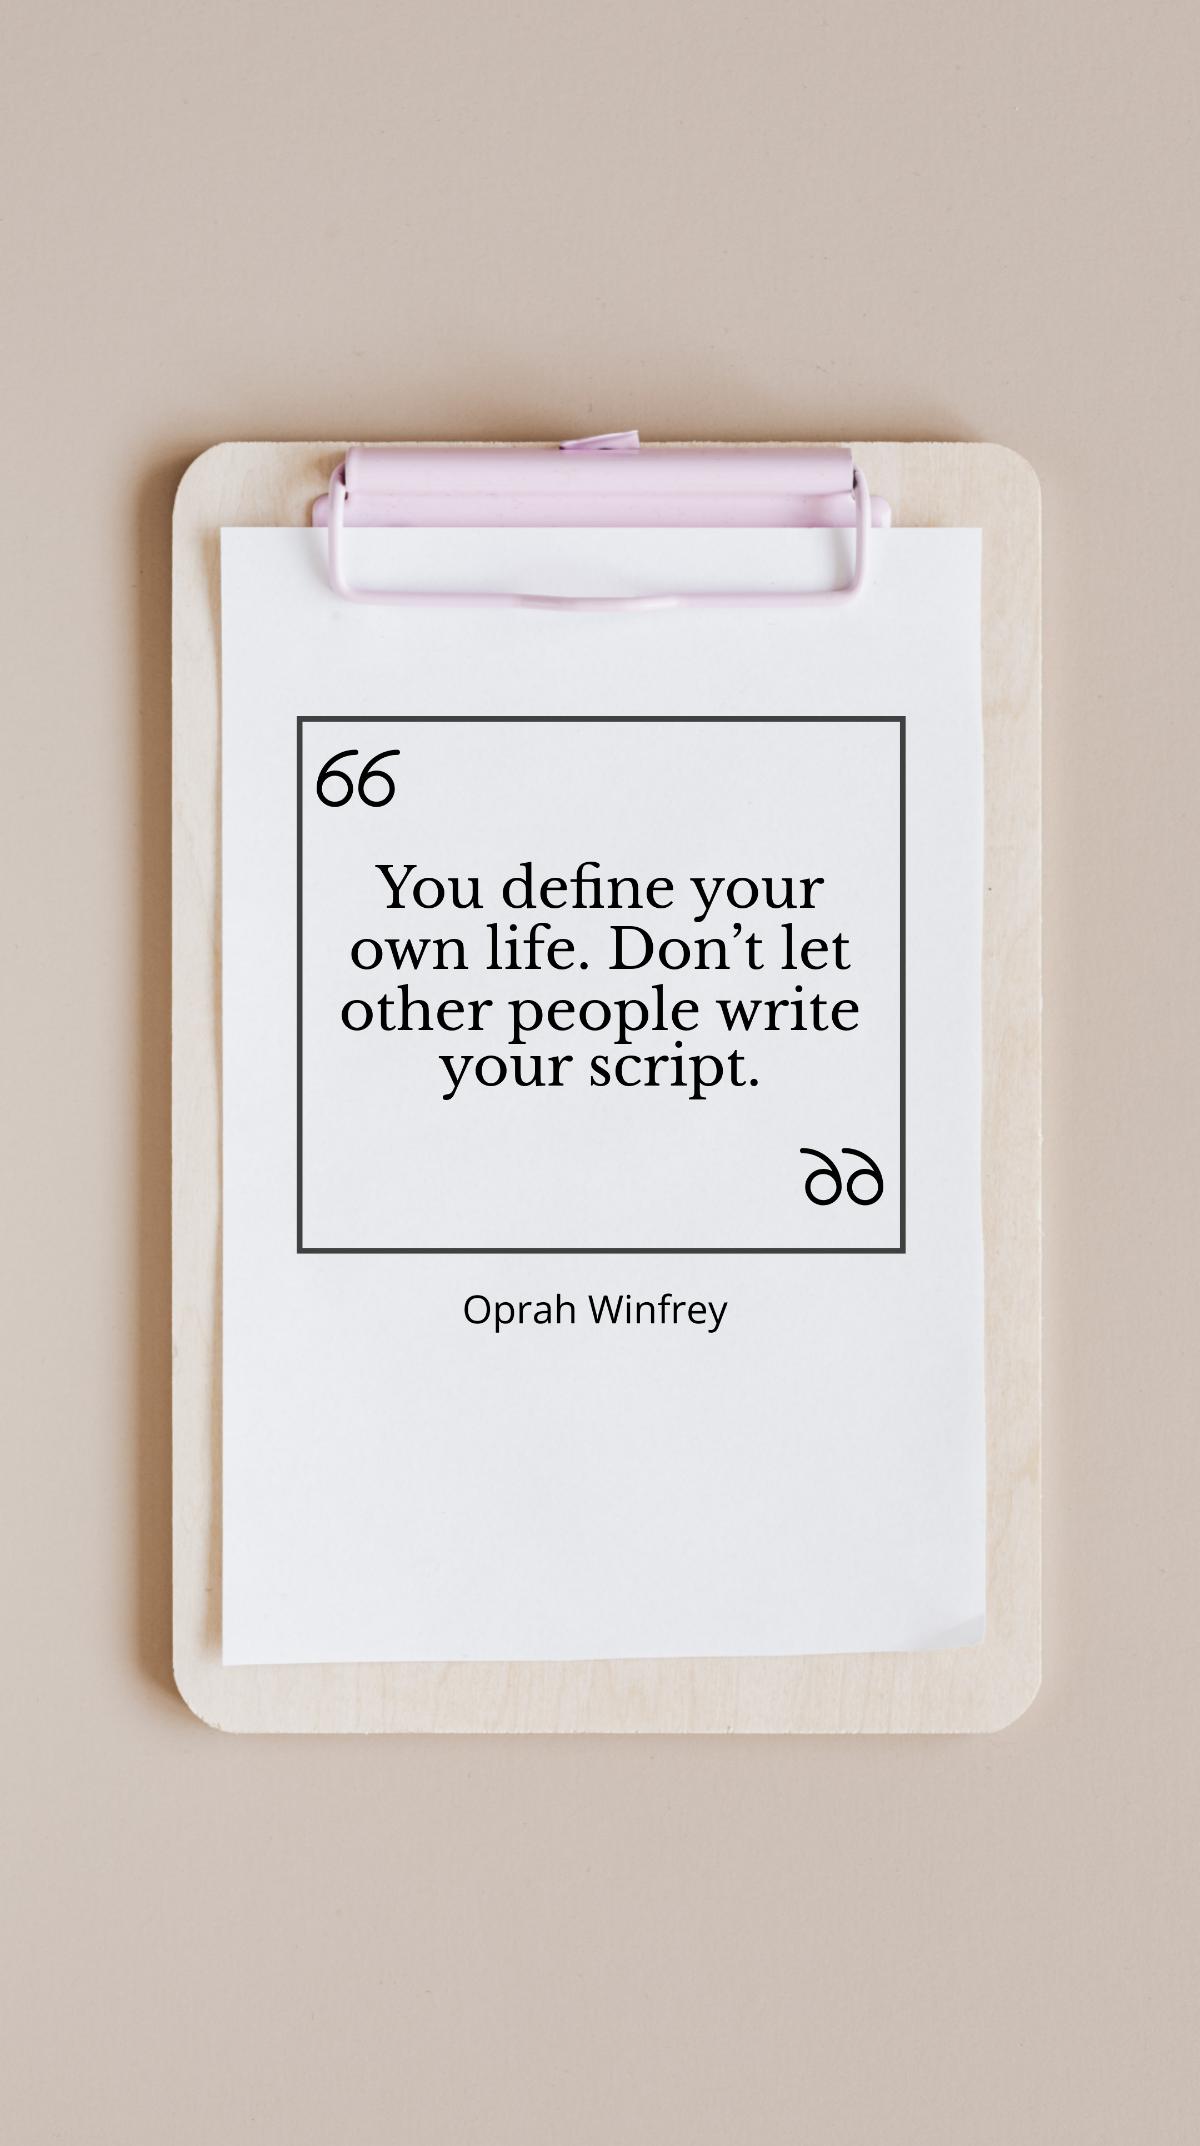 Oprah Winfrey - You define your own life. Don’t let other people write your script